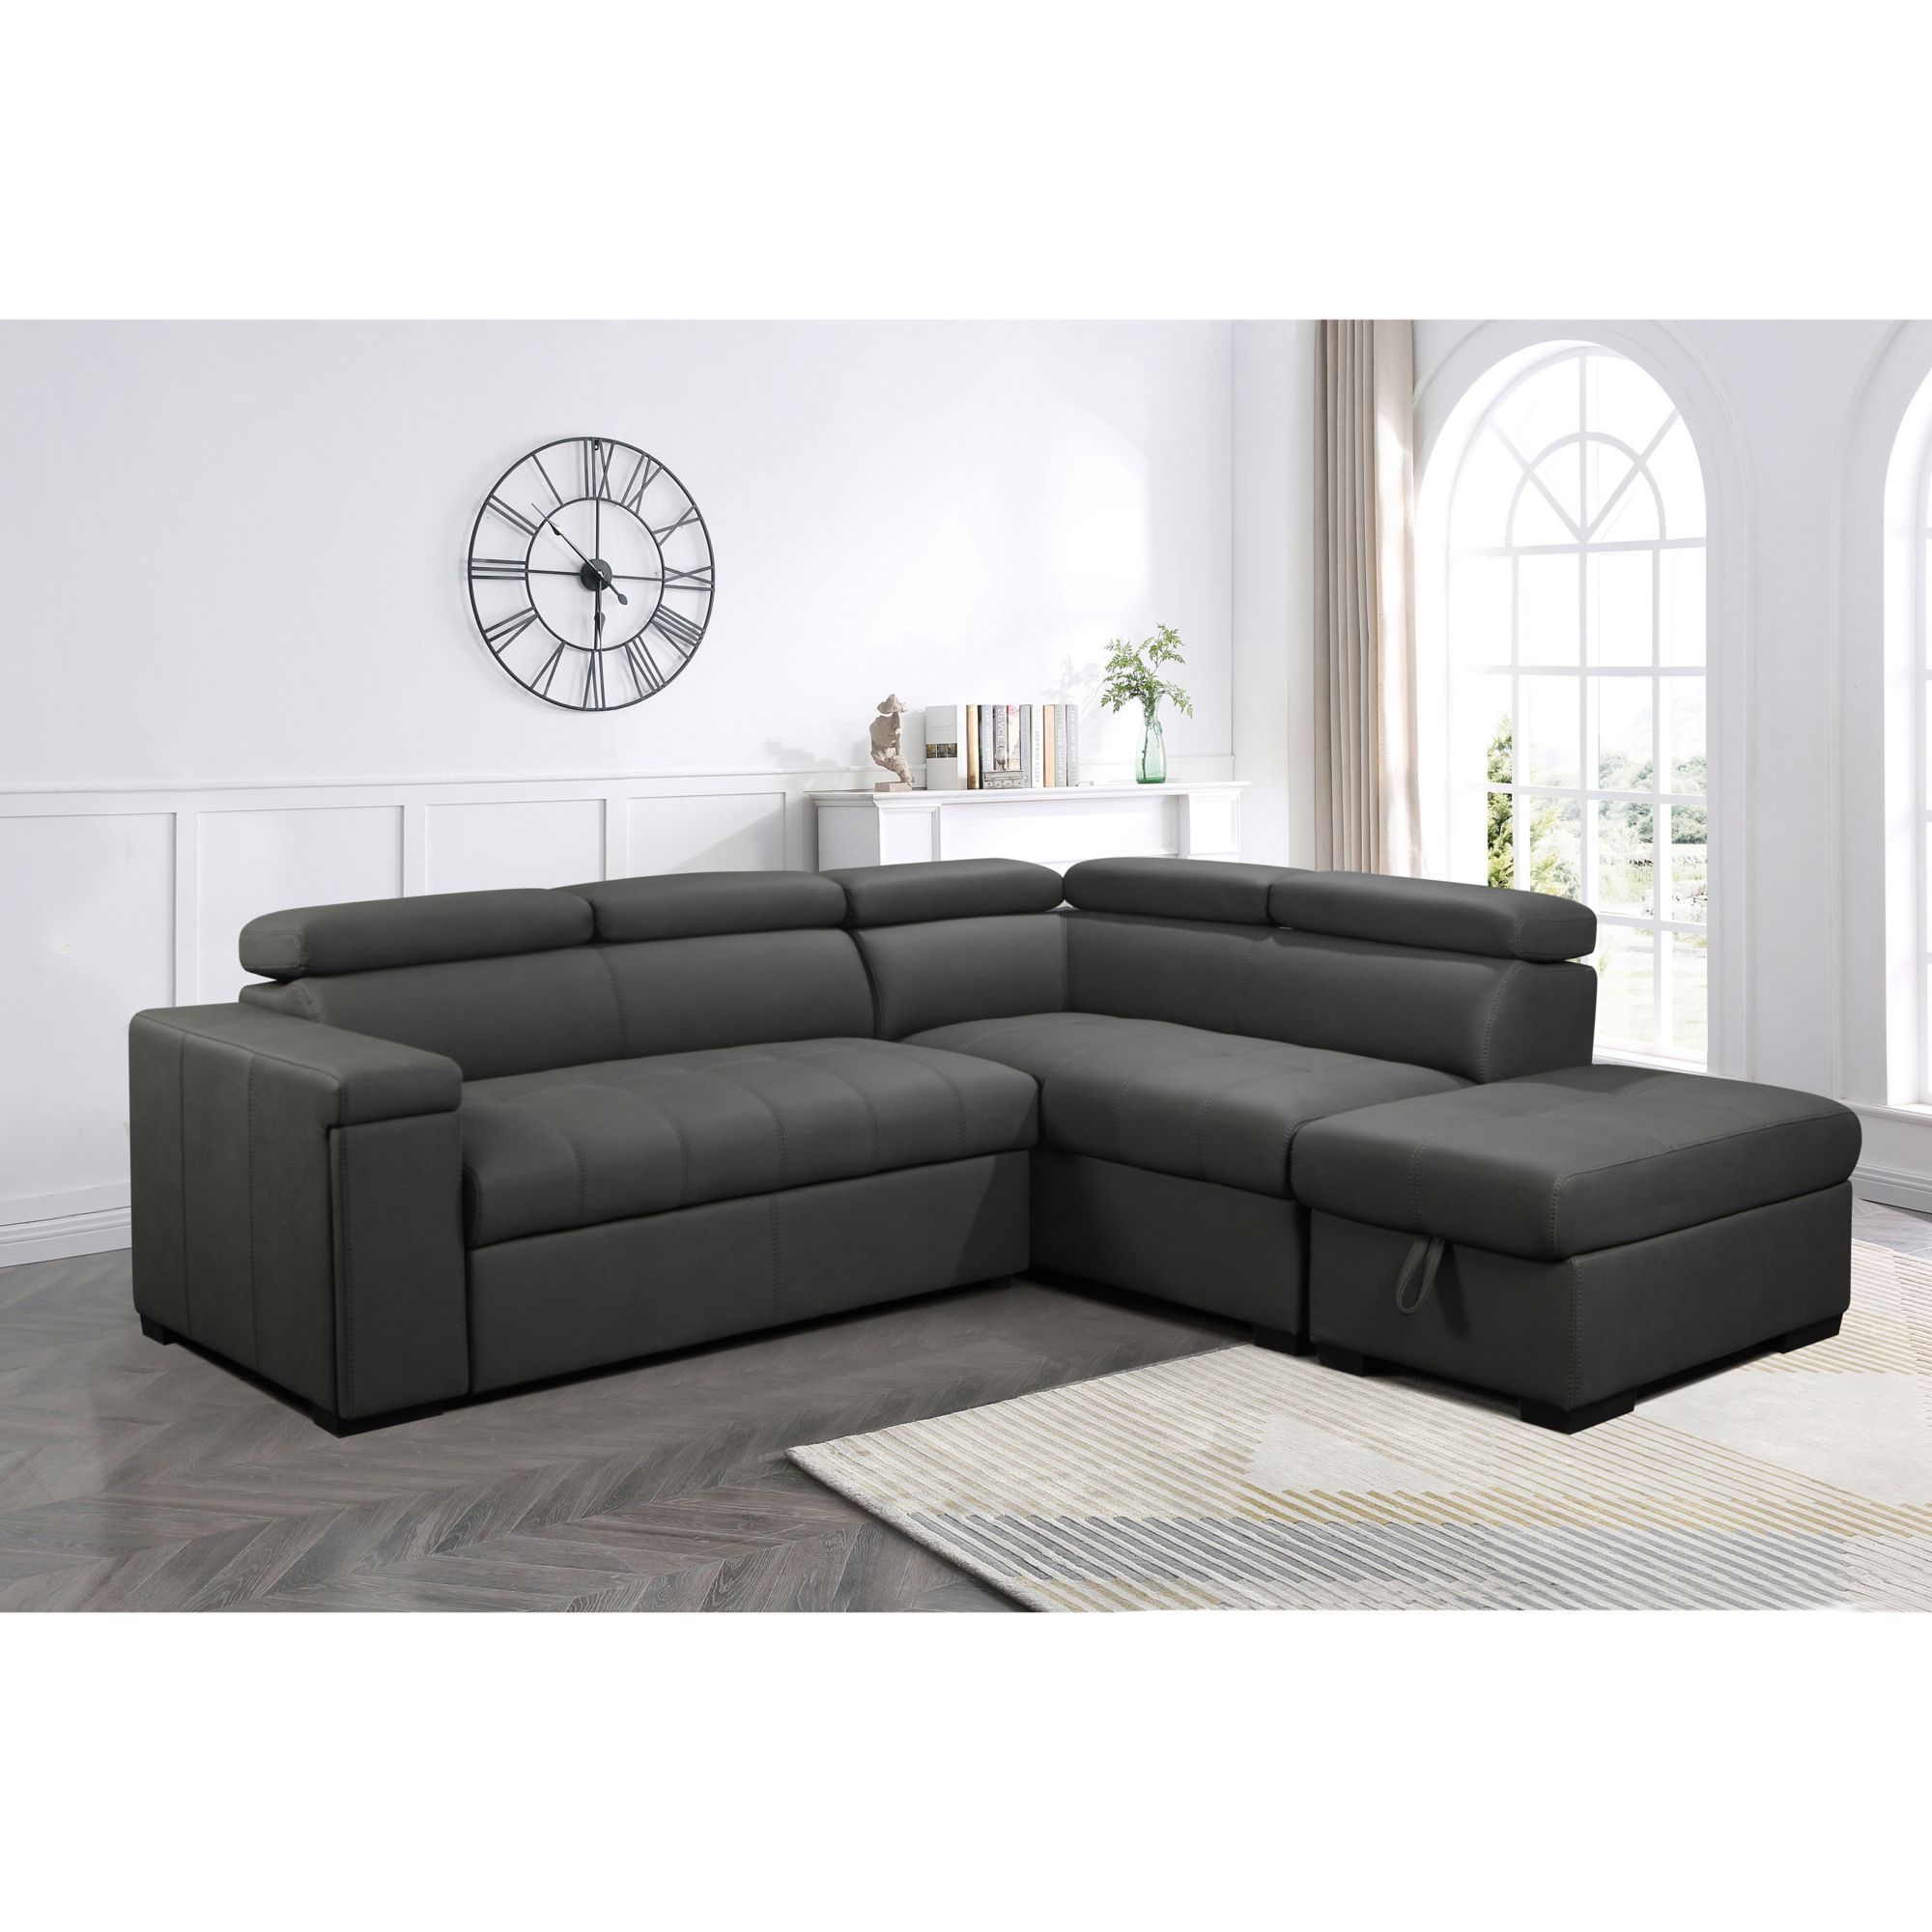 Abbyson Home Macey Fabric Sectional With Pullout Bed - Dark Gray